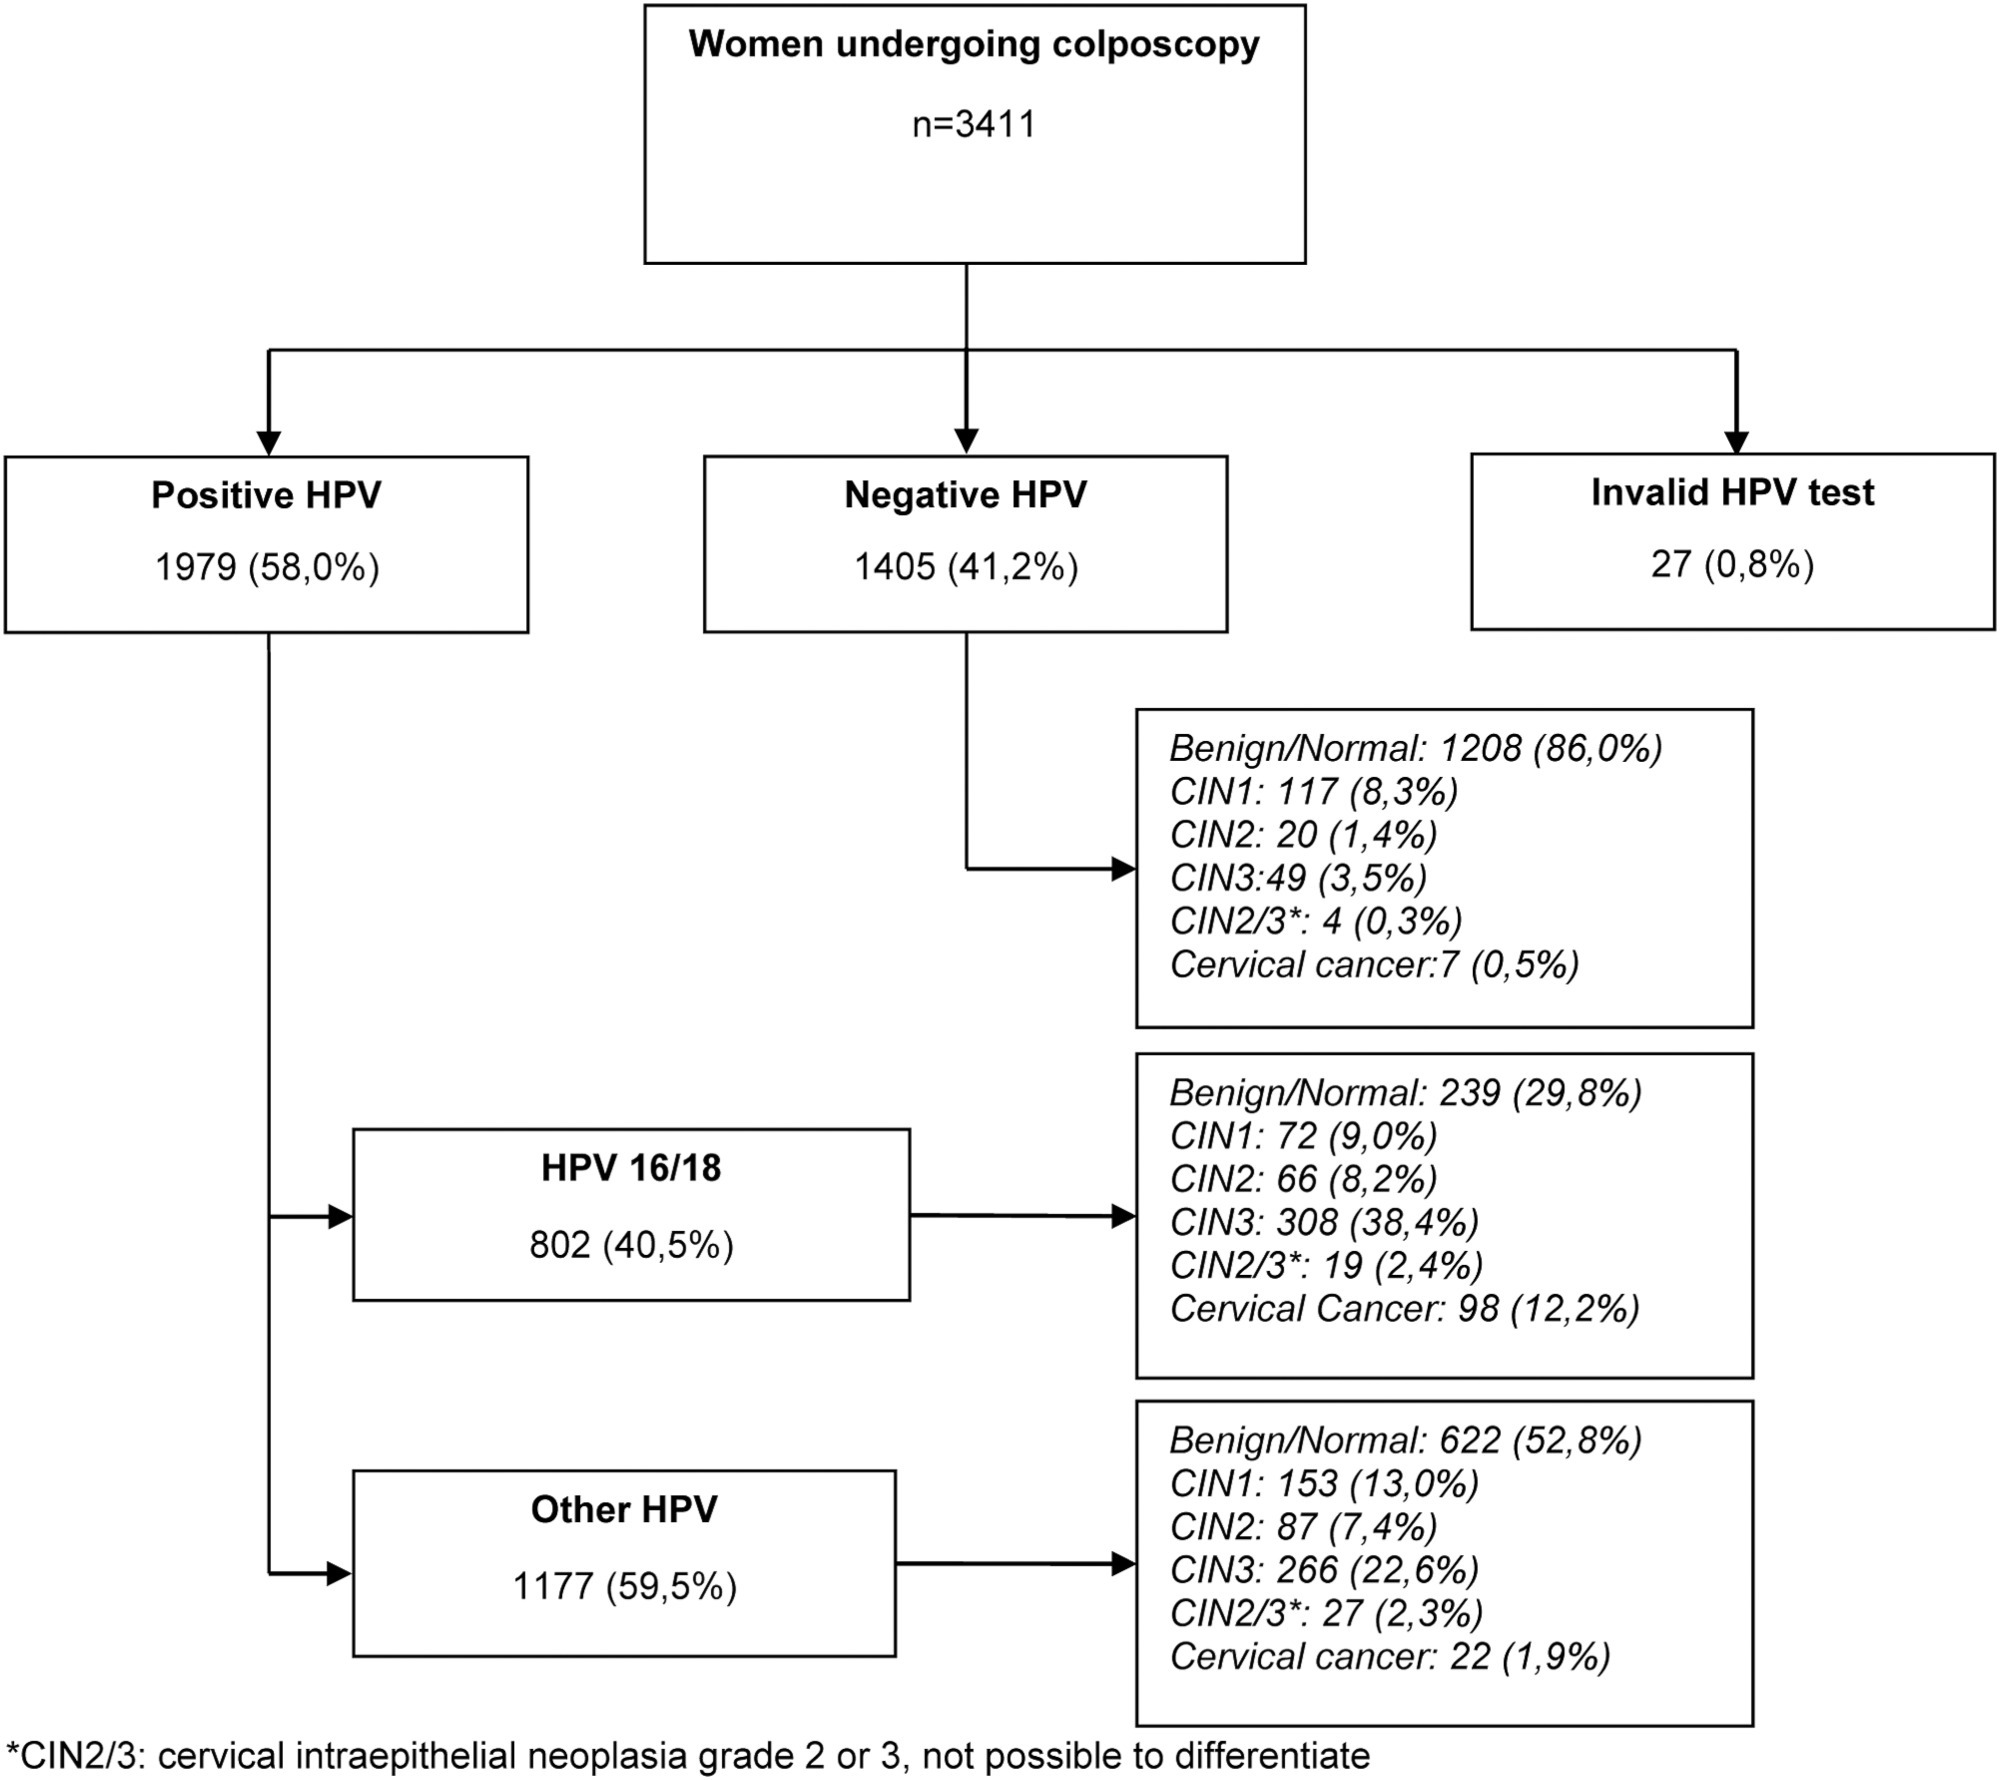 Risk Profile of High-grade Cervical Lesions and Cervical Cancer Considering the Combination of Cytology, HPV Genotype, and Age among Women Undergoing Colposcopy